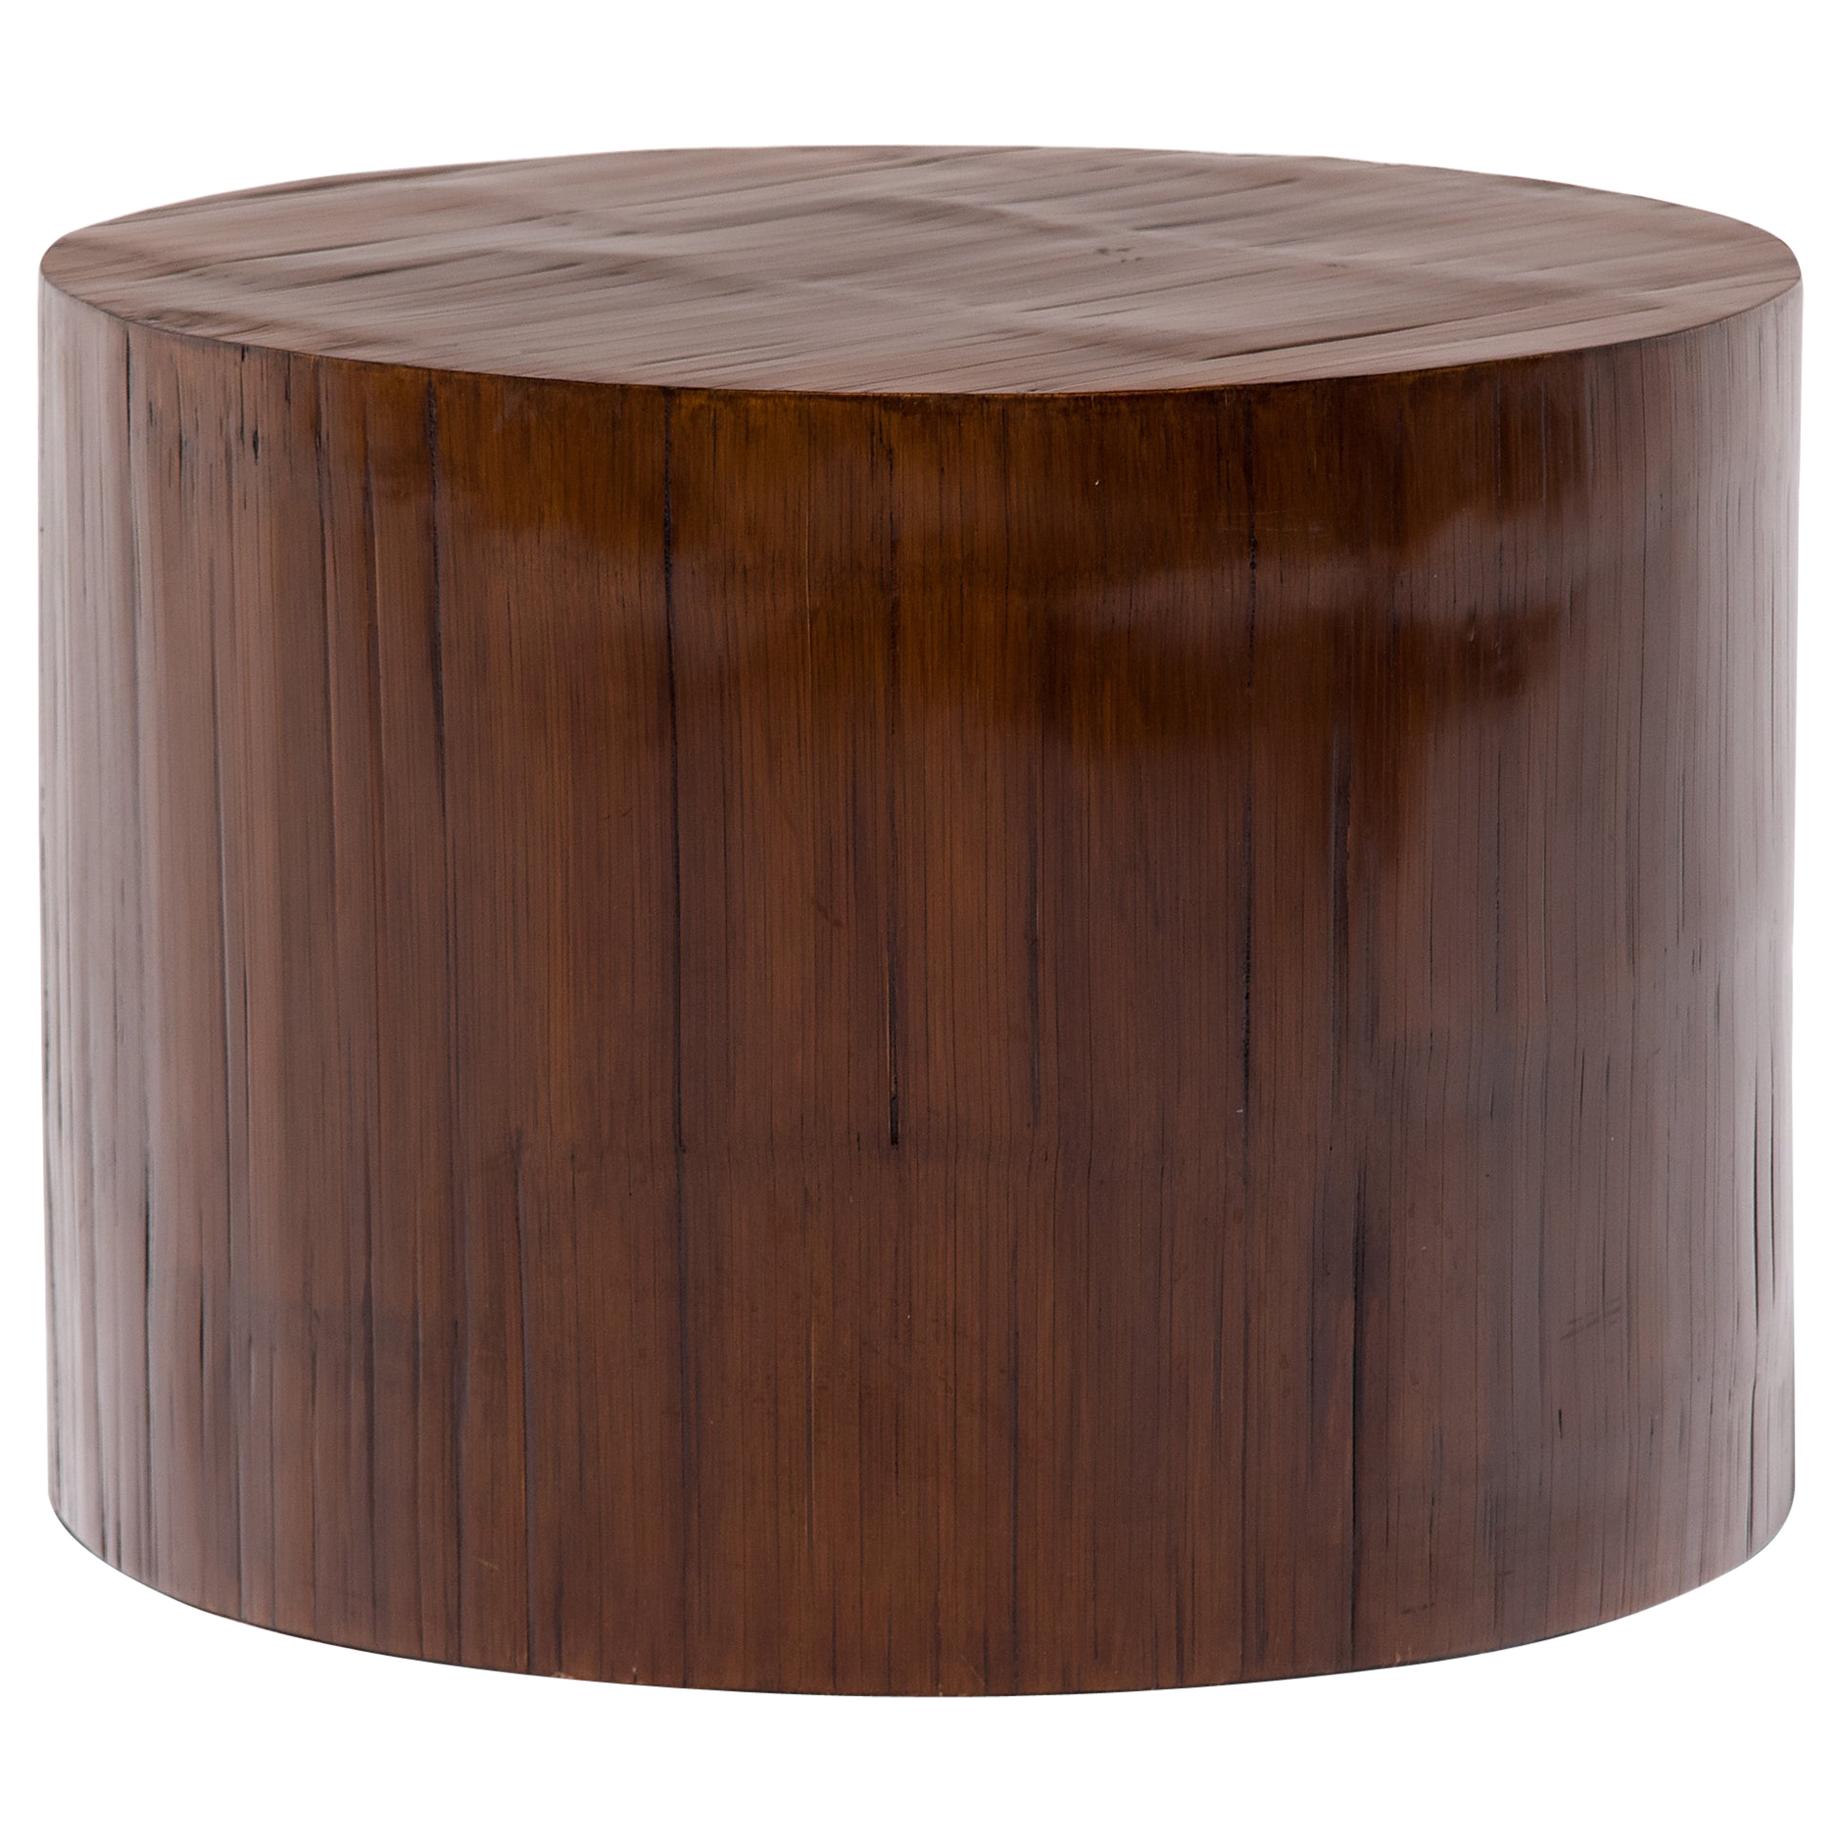 Chinese Round Crushed Bamboo Table